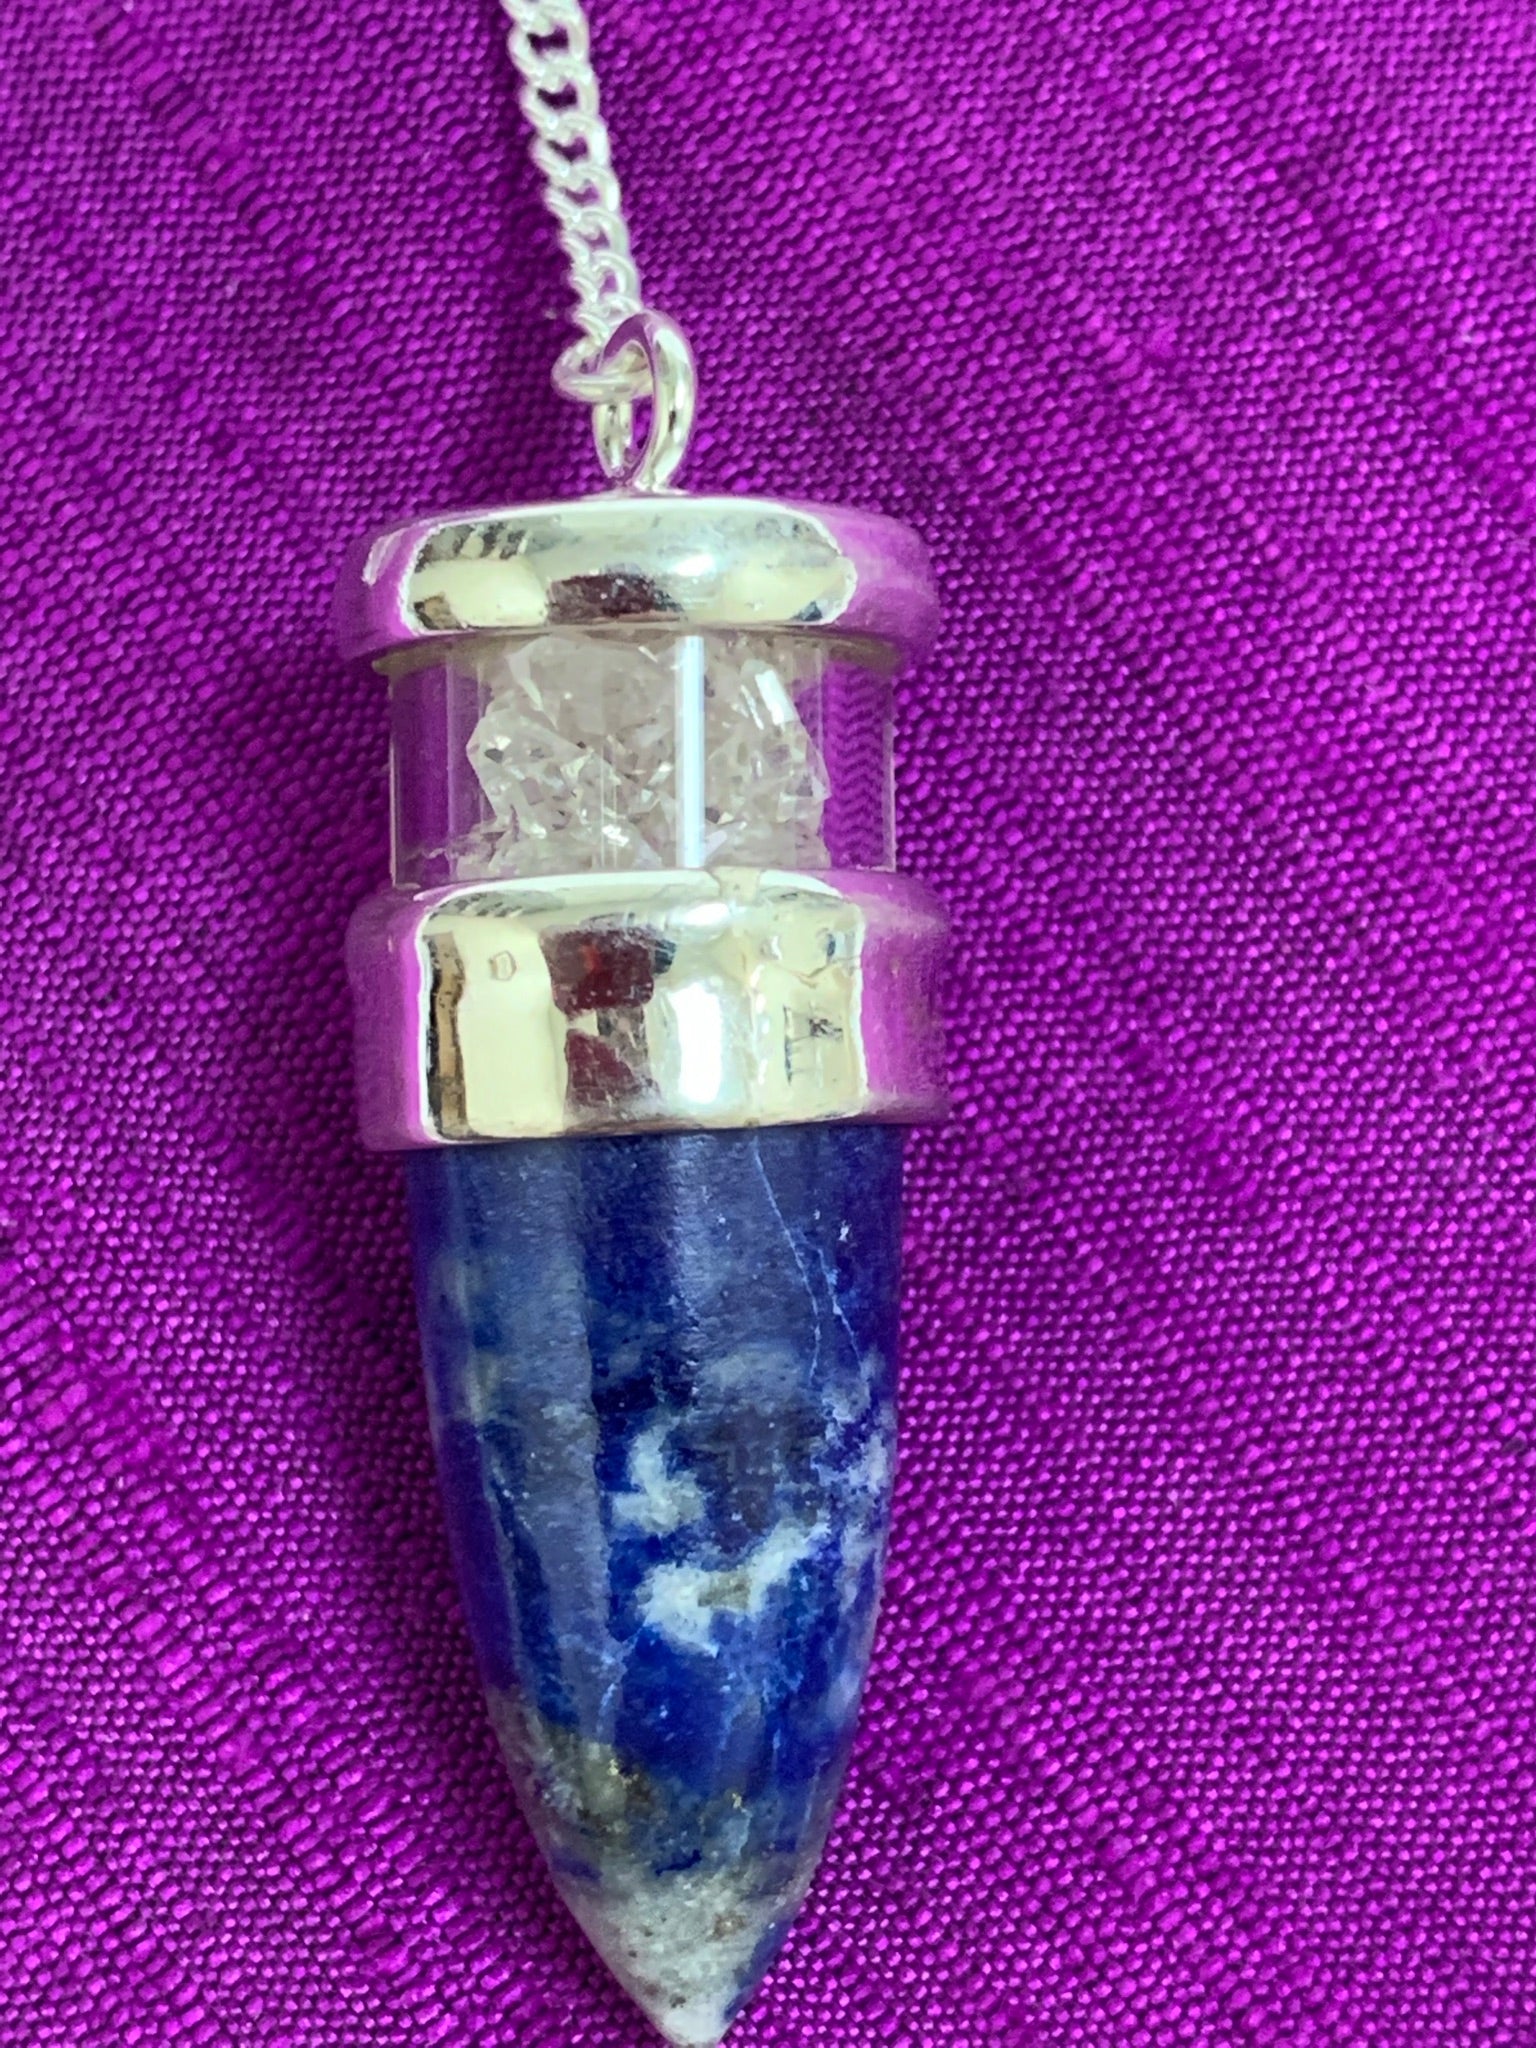 Close-up view. Elegant pendulum with lapis gemstone set in sterling silver with Herkimer diamond chips above it, encased in glass and a clear quartz bead at the opposite end of the silver chain. Pendulums are used as divination tools for receiving information from your guides, angels and higher Self.